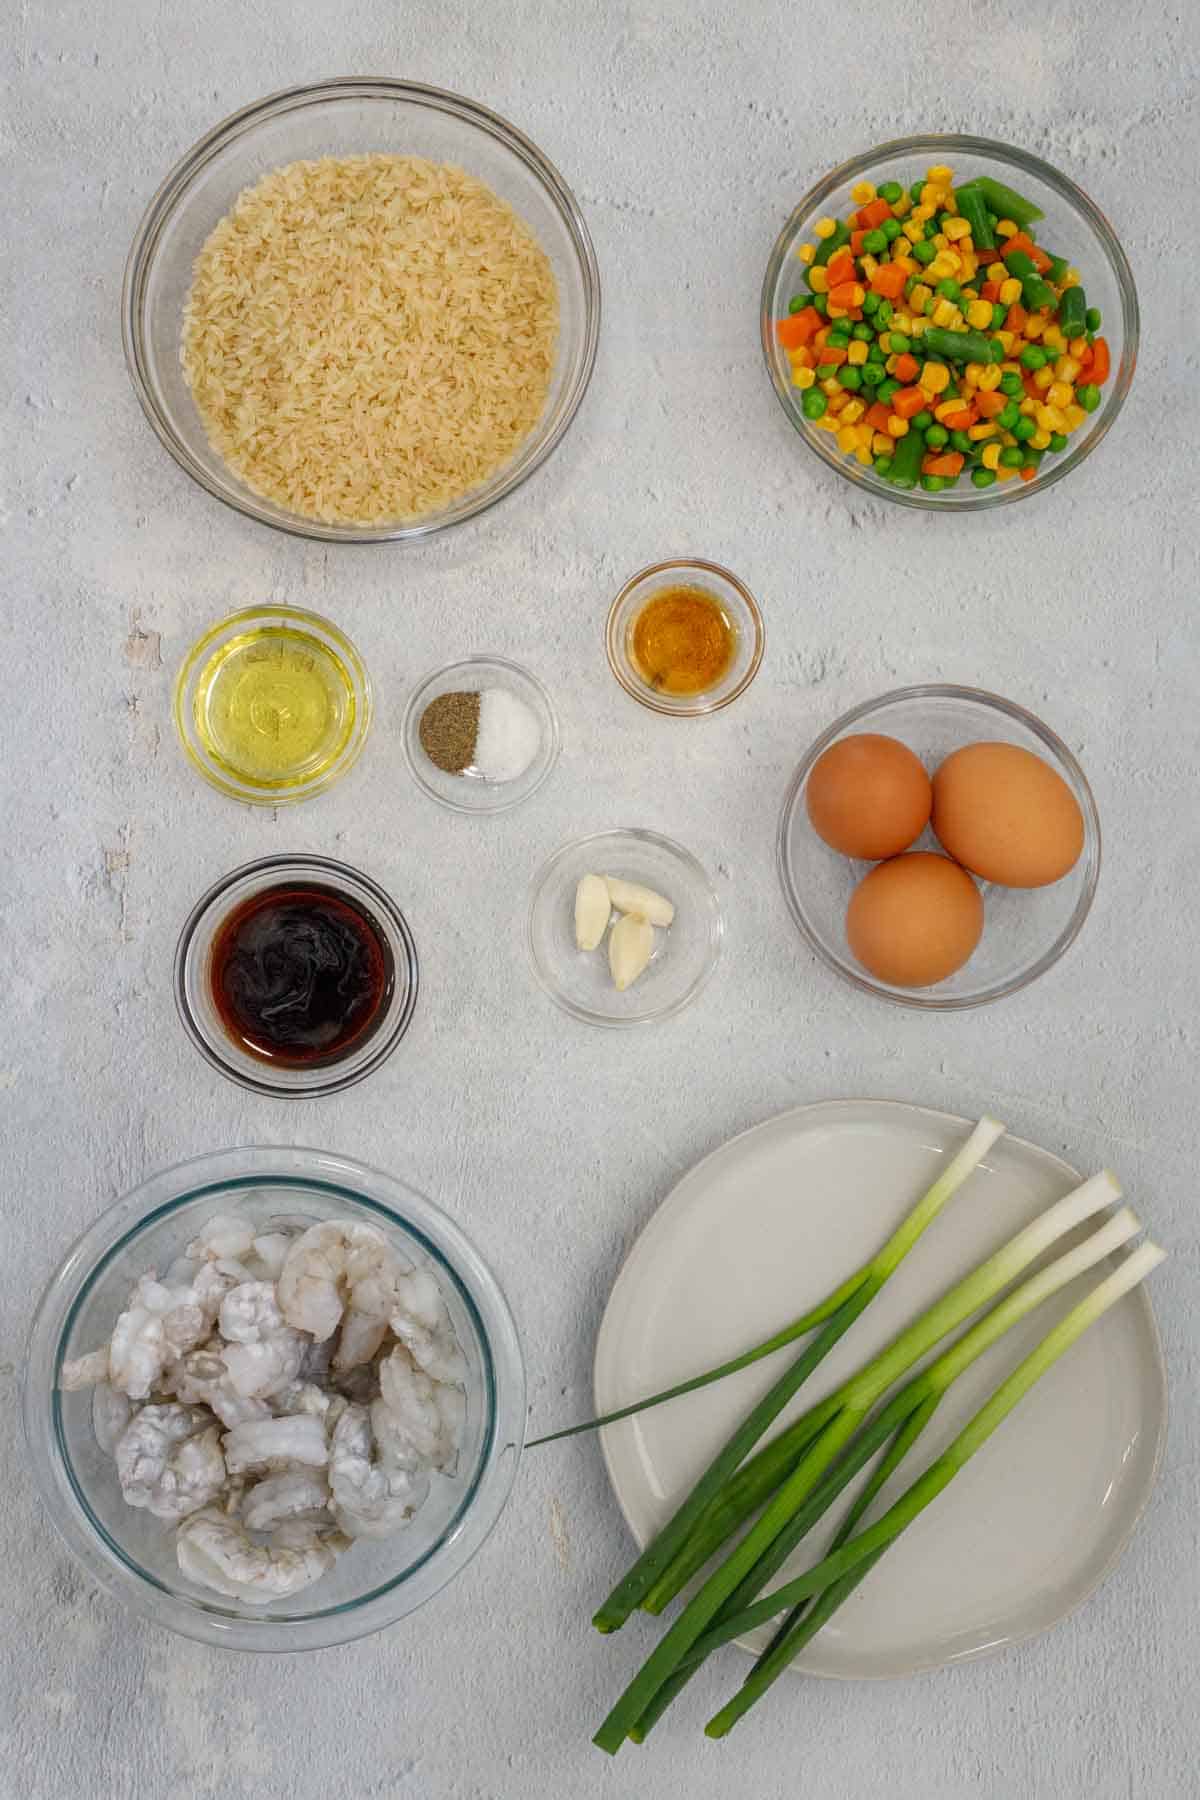 All ingredients needed to make shrimp fried rice separated.